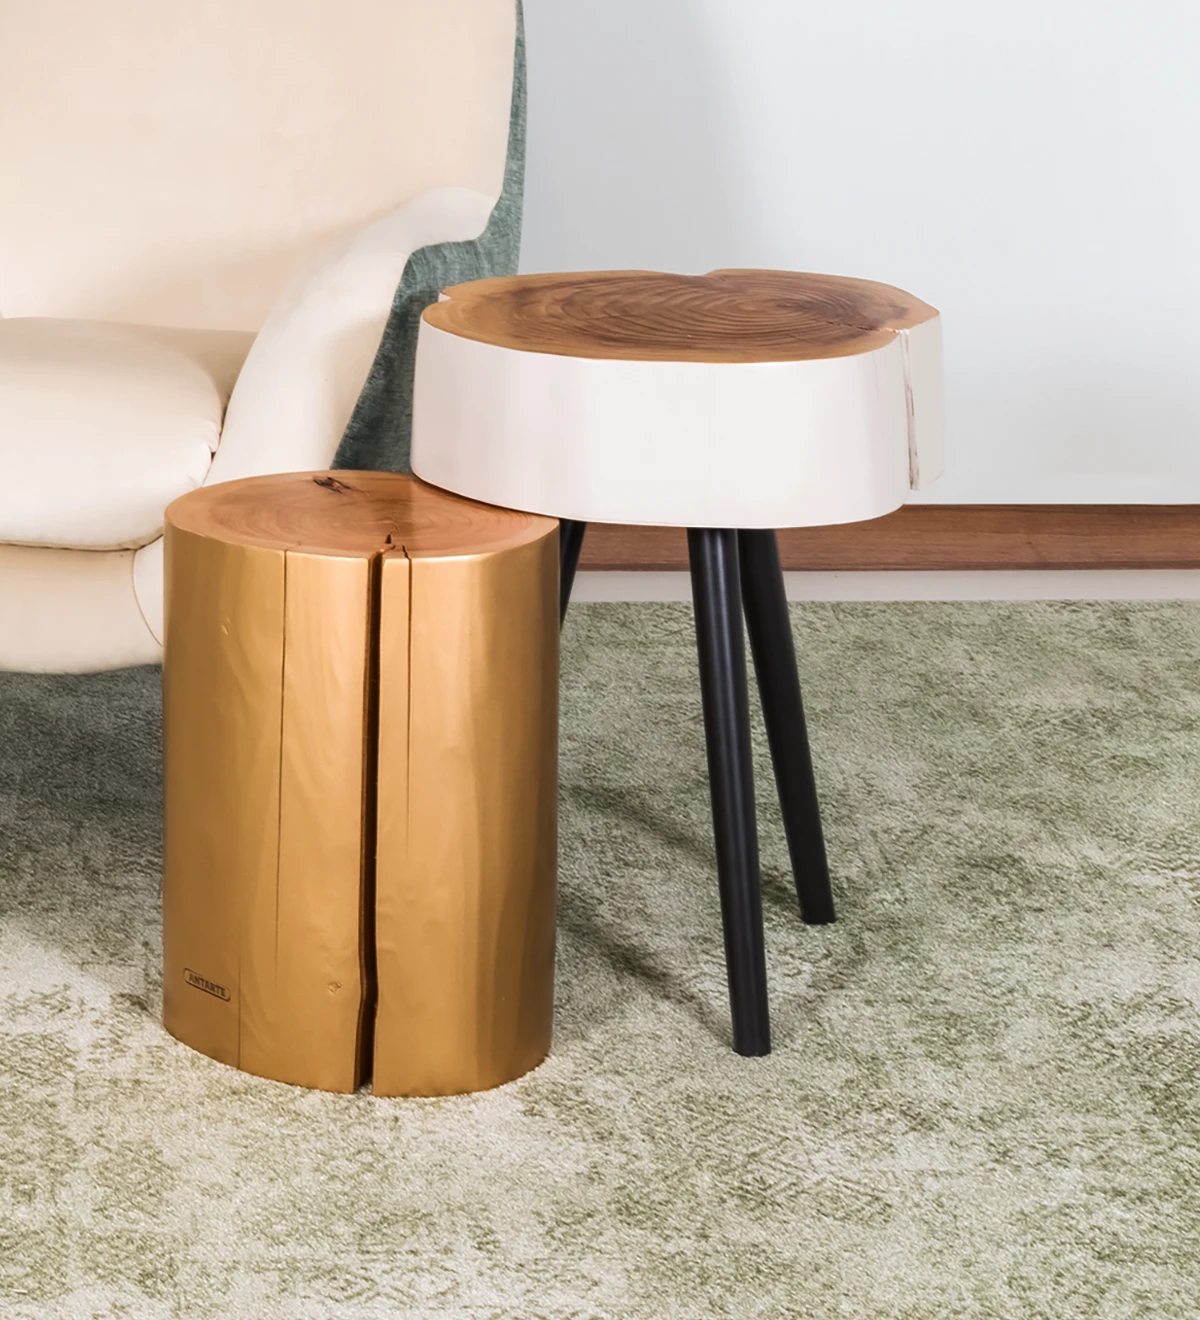 Trunk side table in natural cryptomeria wood lacquered in pearl, with 3 turned legs lacquered in black.